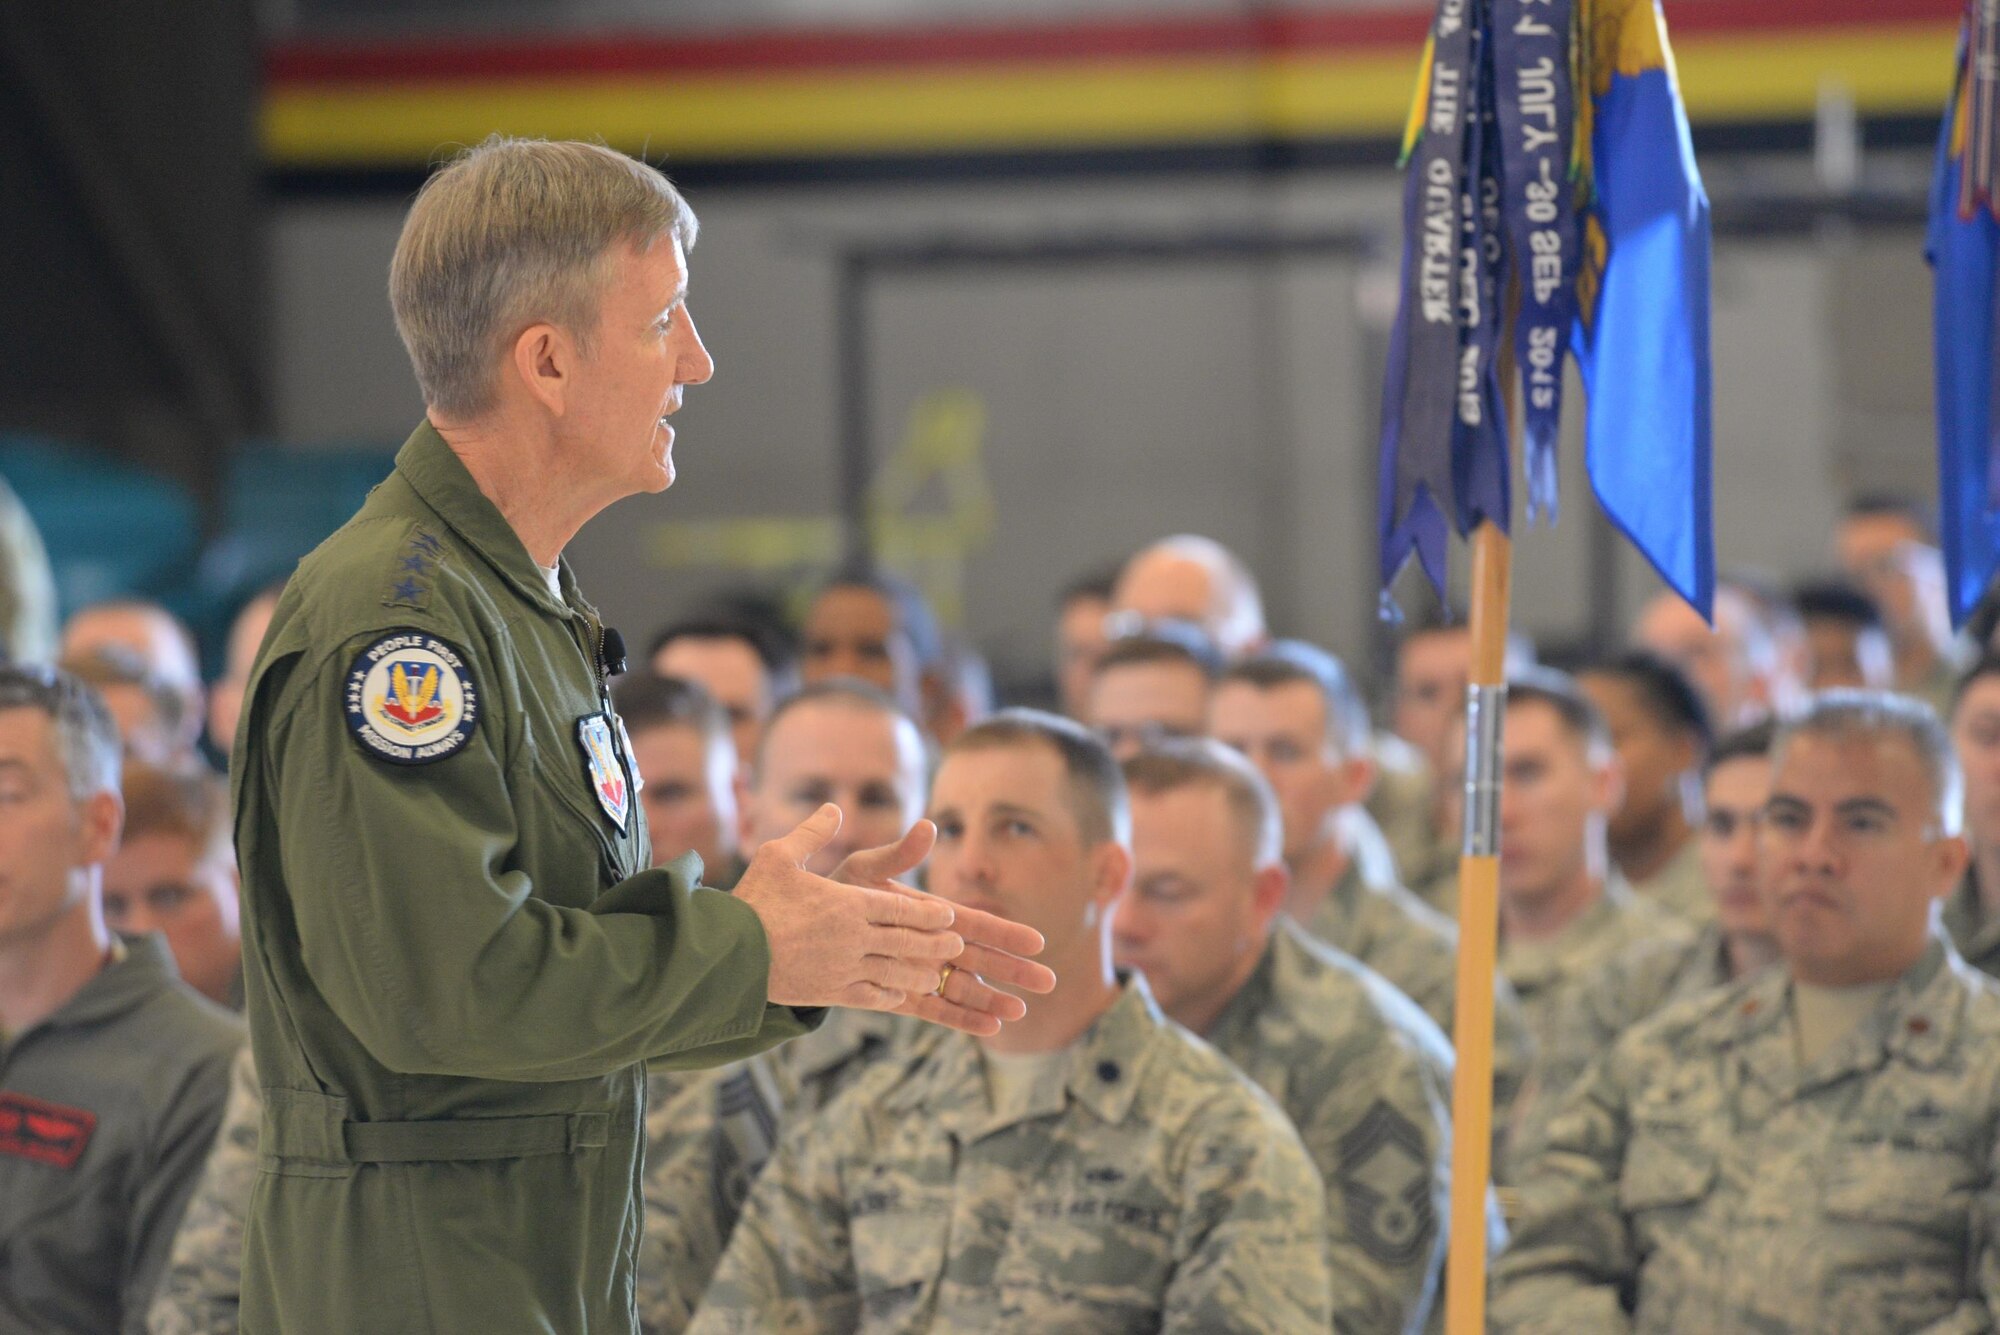 U.S. Air Force Gen. Hawk Carlisle, commander of Air Combat Command, speaks to 388th Fighter Wing Airmen during an all-call April 7 at Hill Air Force Base, Utah. Carlisle thanked the group, saying that the reason he still serves is because of Airmen, who are “the greatest group of people in the world.” (U.S. Air Force photo by Paul Holcomb)